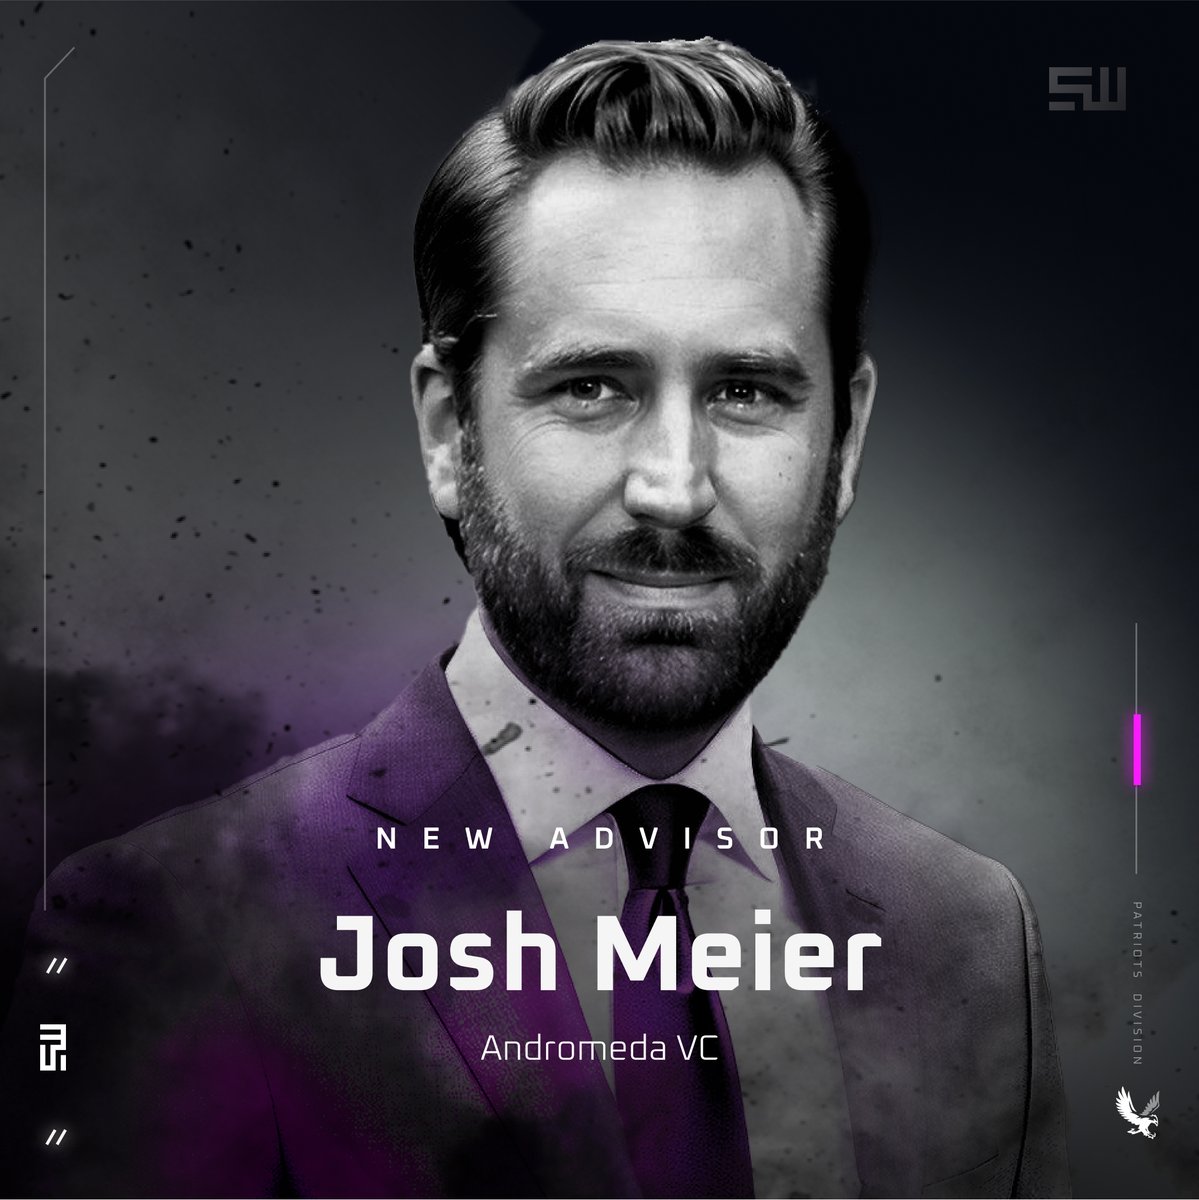 ADVISOR ANNOUNCEMENT Introducing Josh Meier, Managing Partner @AndromedaVC as an advisor for SHADOW WAR 🌟 A veteran of the industry for over eight years, Josh will be hands-on with the team as we work to deliver unique web3 experiences for the next generation of gamers 🎮